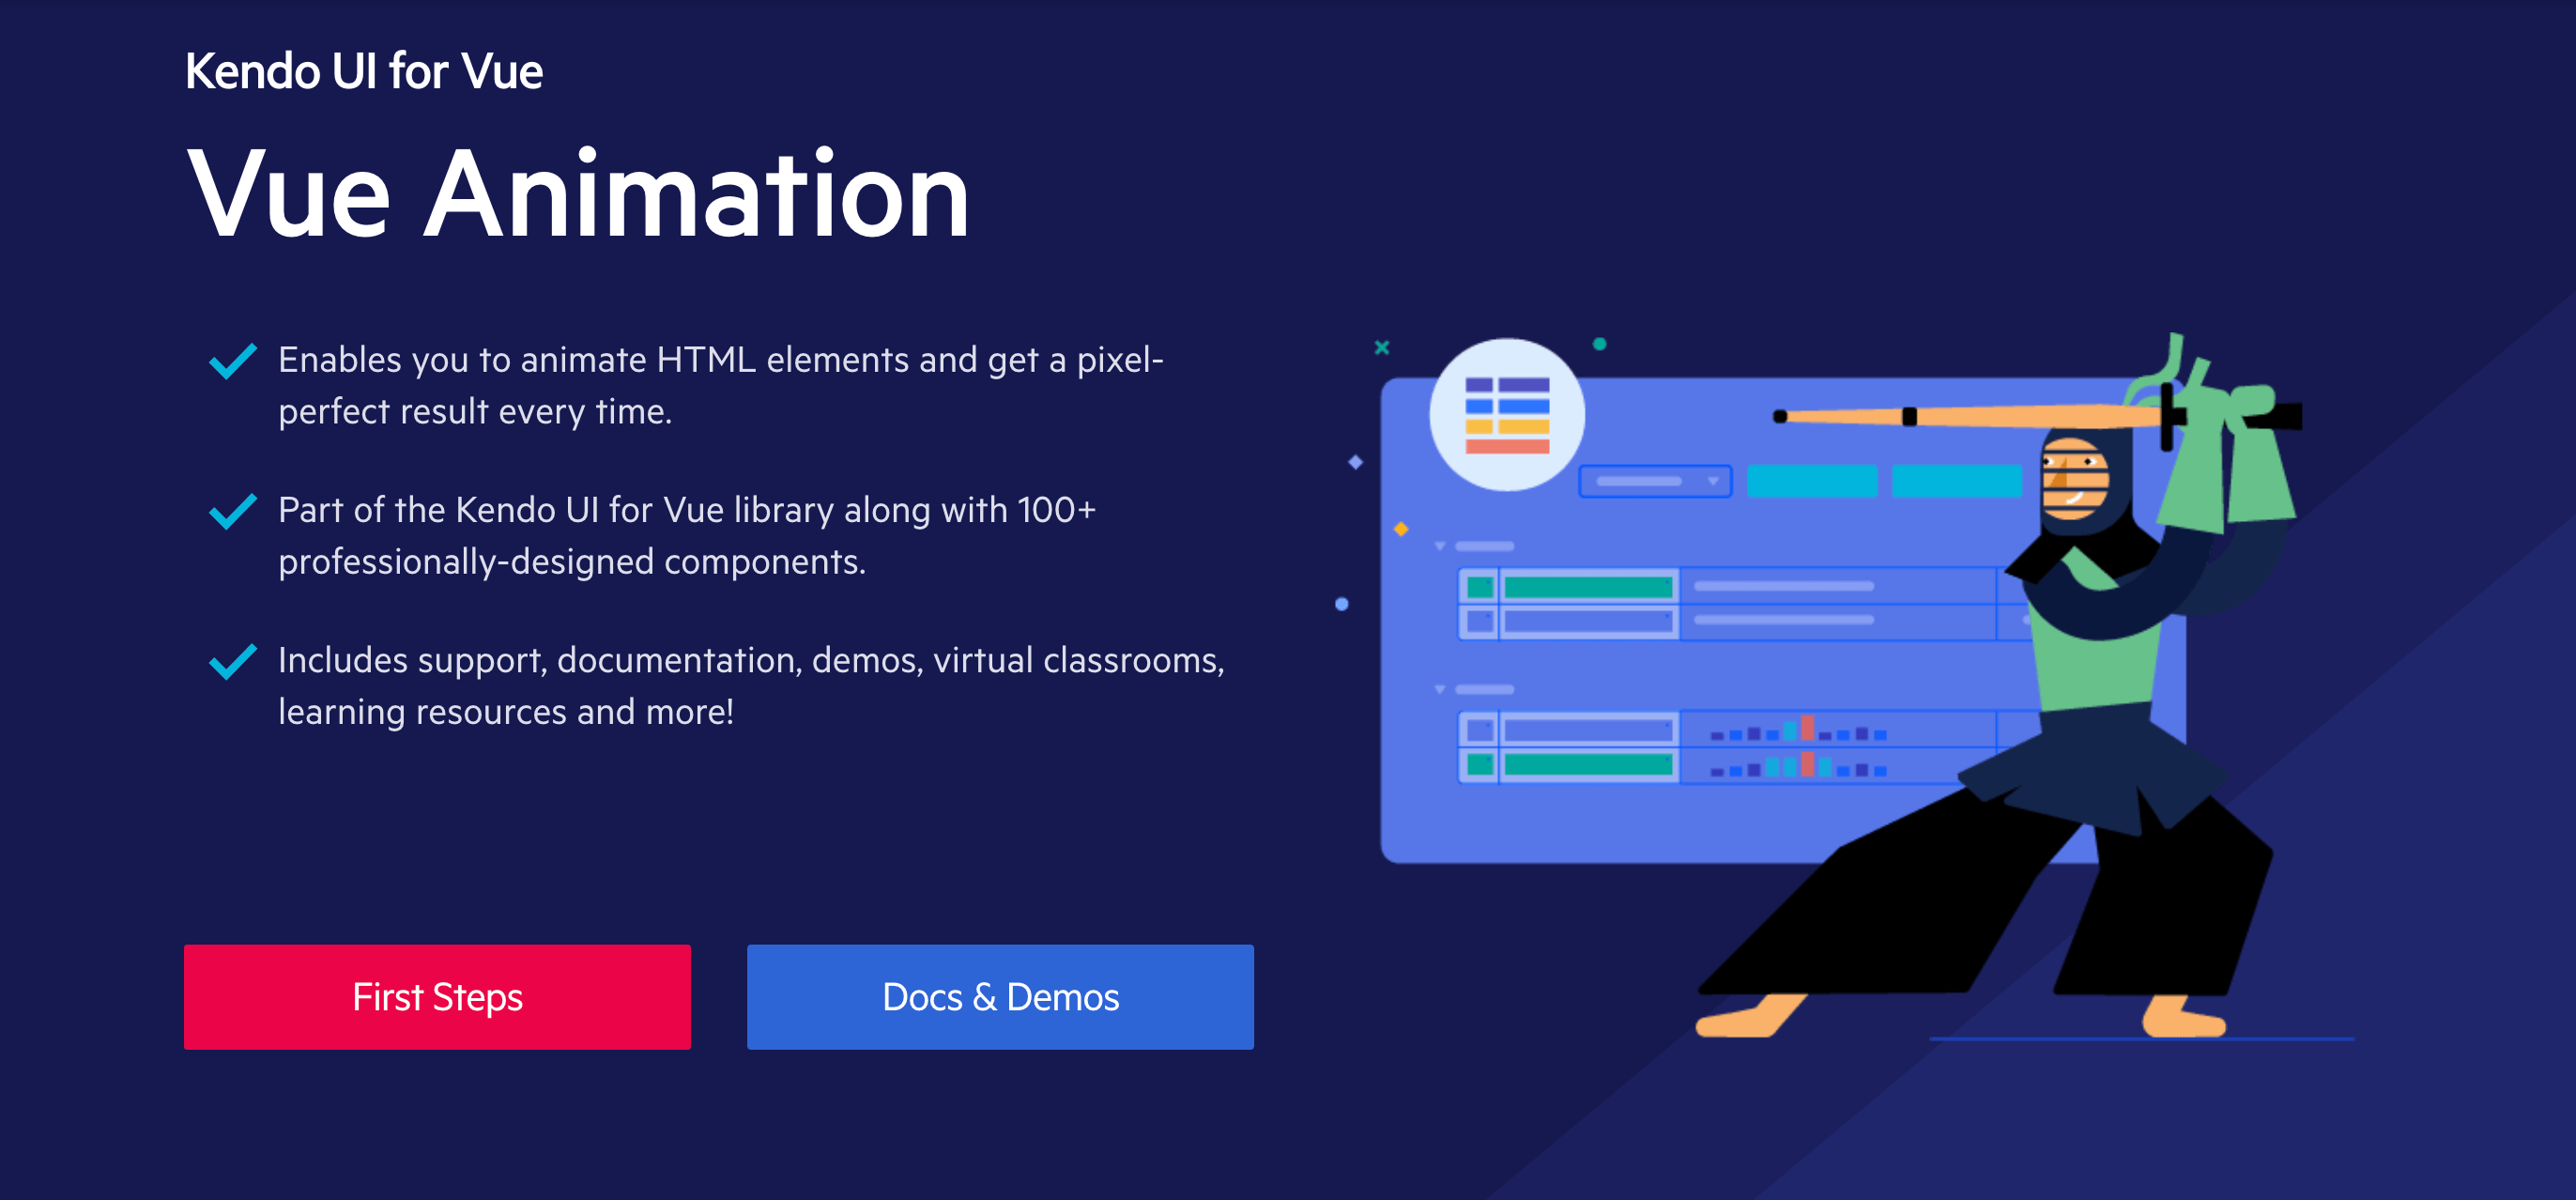 Kendo UI for Vue Animation component page screencap